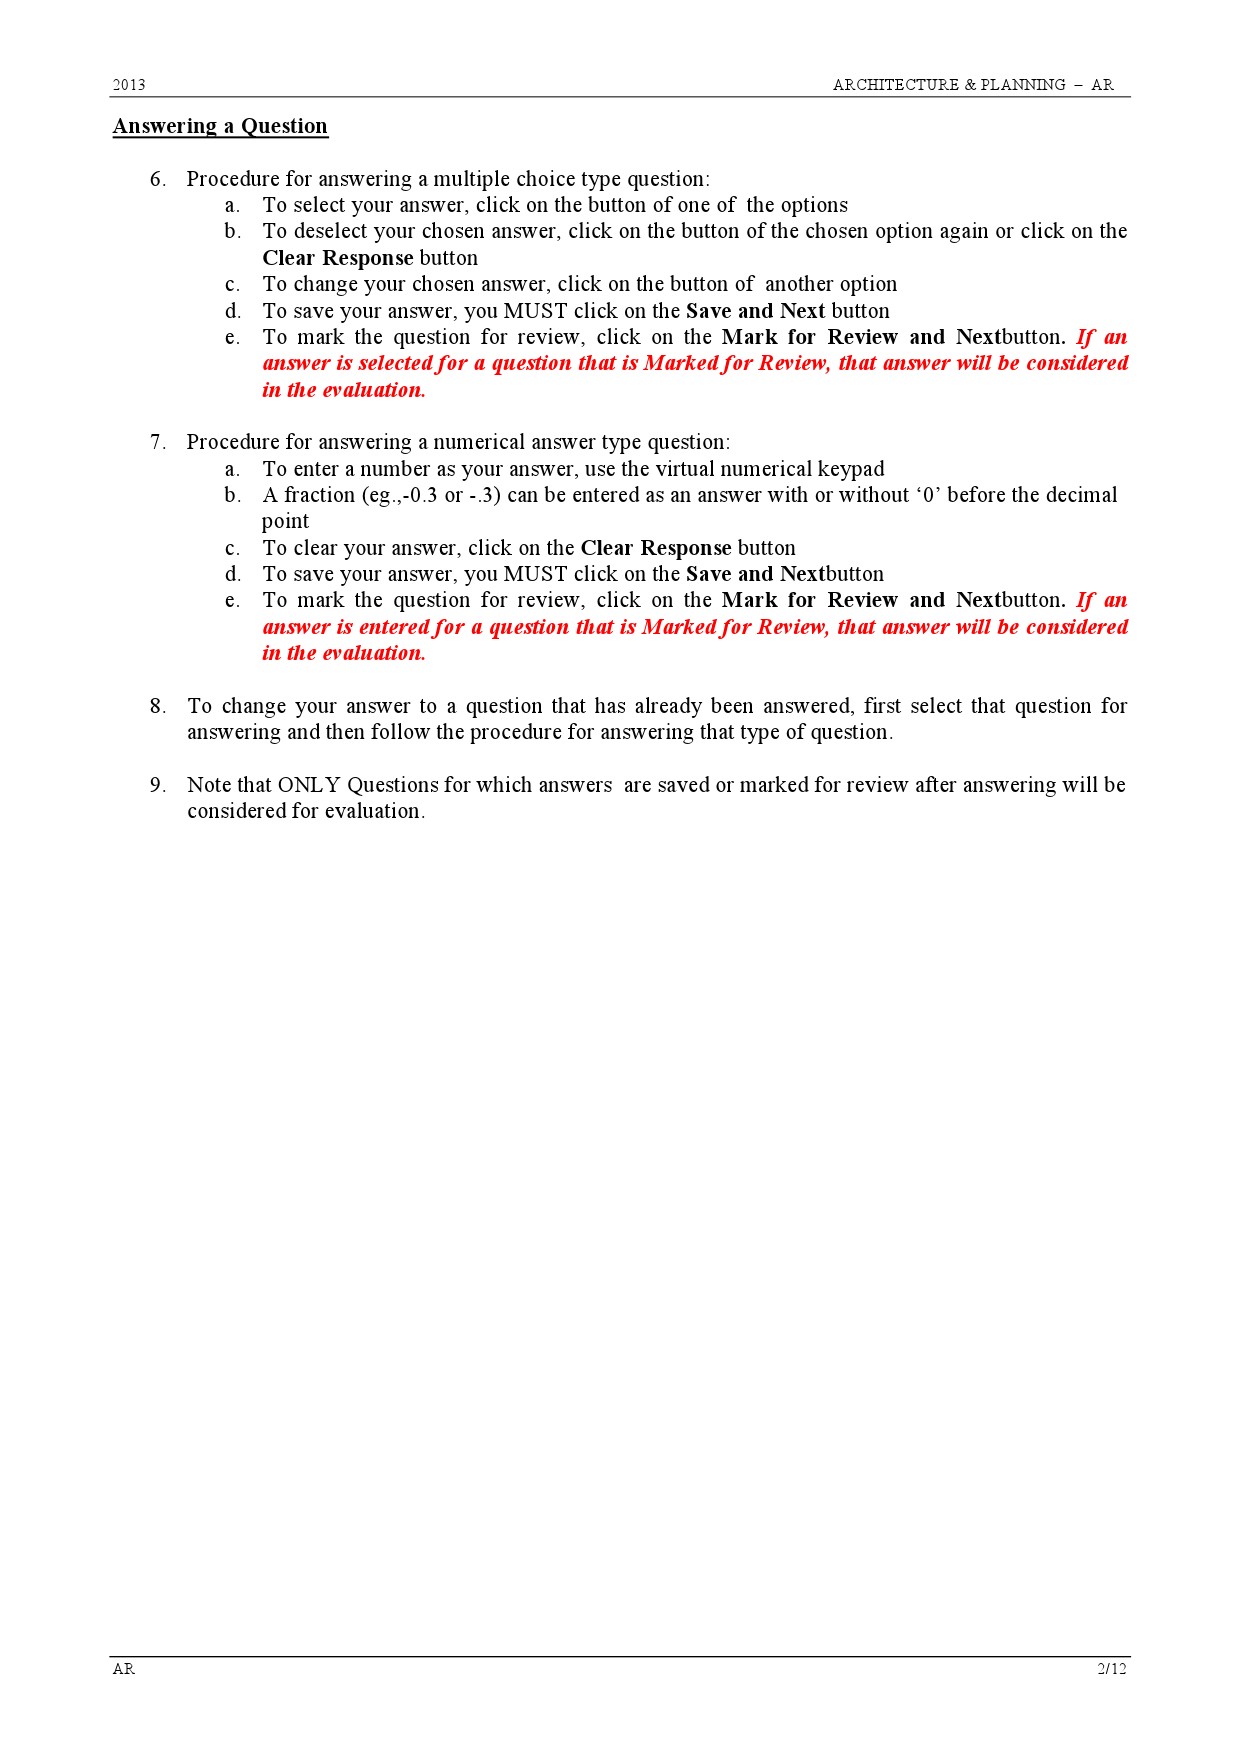 GATE Exam Question Paper 2013 Architecture and Planning 2